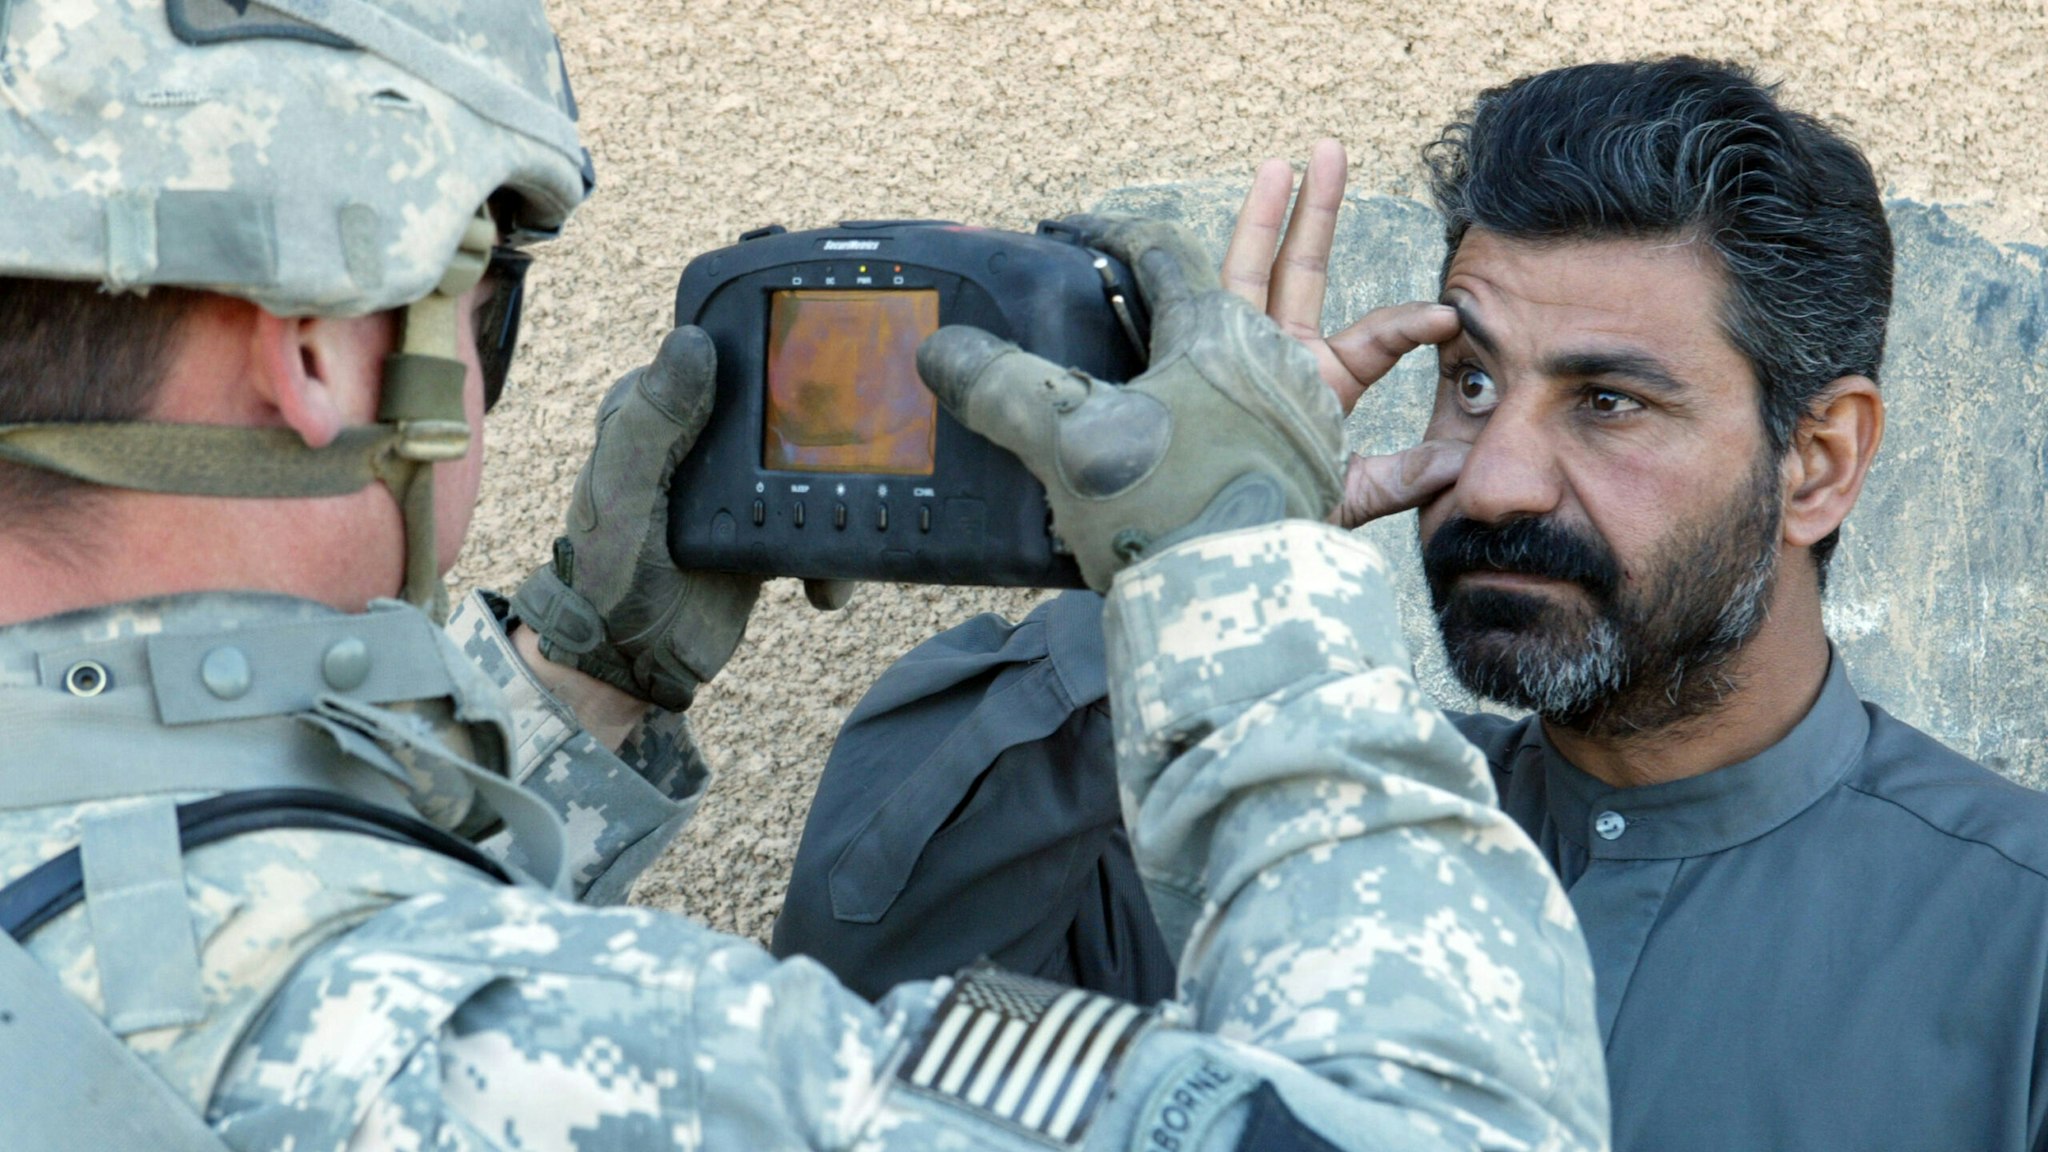 An iraqi citizen has his eye scanned by a US soldier with the 1st Squadron, 33rd Cavalry Regiment, in Hoy Al Askariah a small town south of Baghdad. The device being used is the HIIDE or Hand-held Interagency Identity Detection Equipment system, a biometric identification database with the which soldier can quickly input and access the name, age, address, religious sect, birthplace, fingerprints, retinal information, and facial photograph of any individual who has already been entered into the system. | Location: Hoy Al Askariah, Iraq.